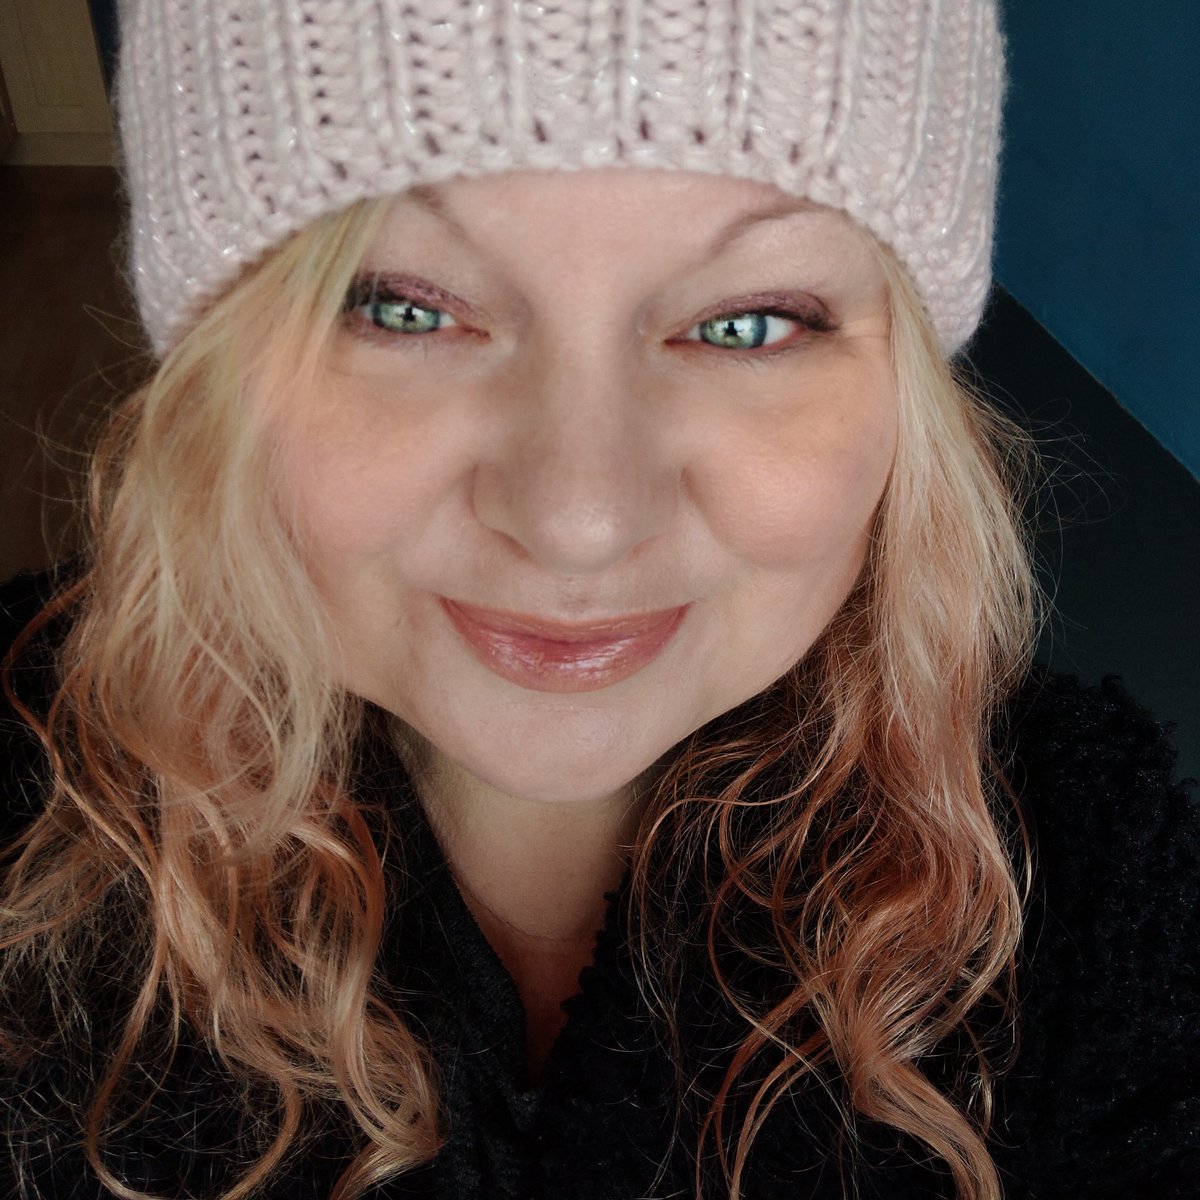 My first ever bobble hat ! 
And I only look half silly in it ! 
#meetthemaker #inabobblehat 
#mhhsbd #uksnow